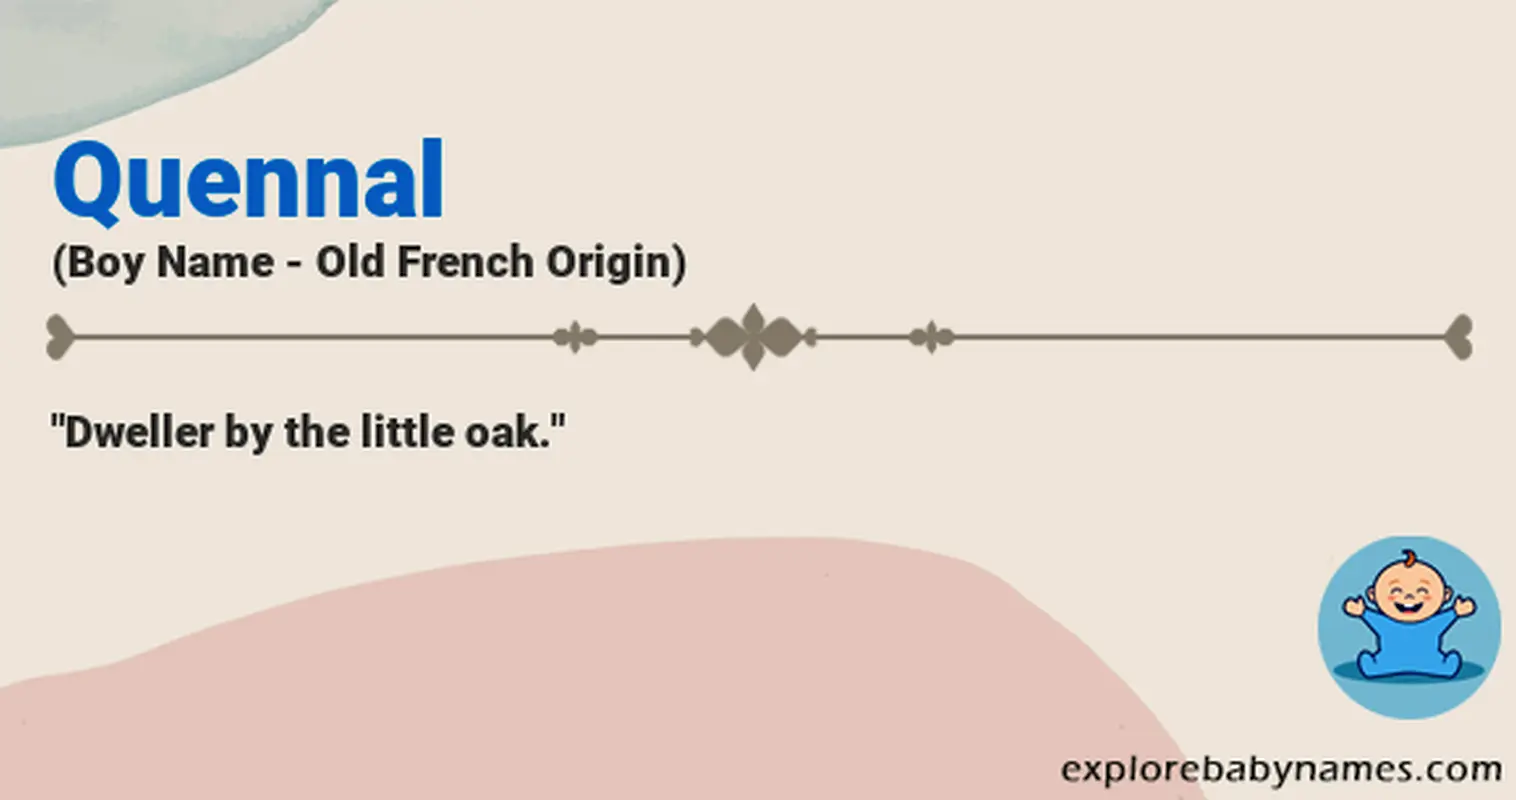 Meaning of Quennal